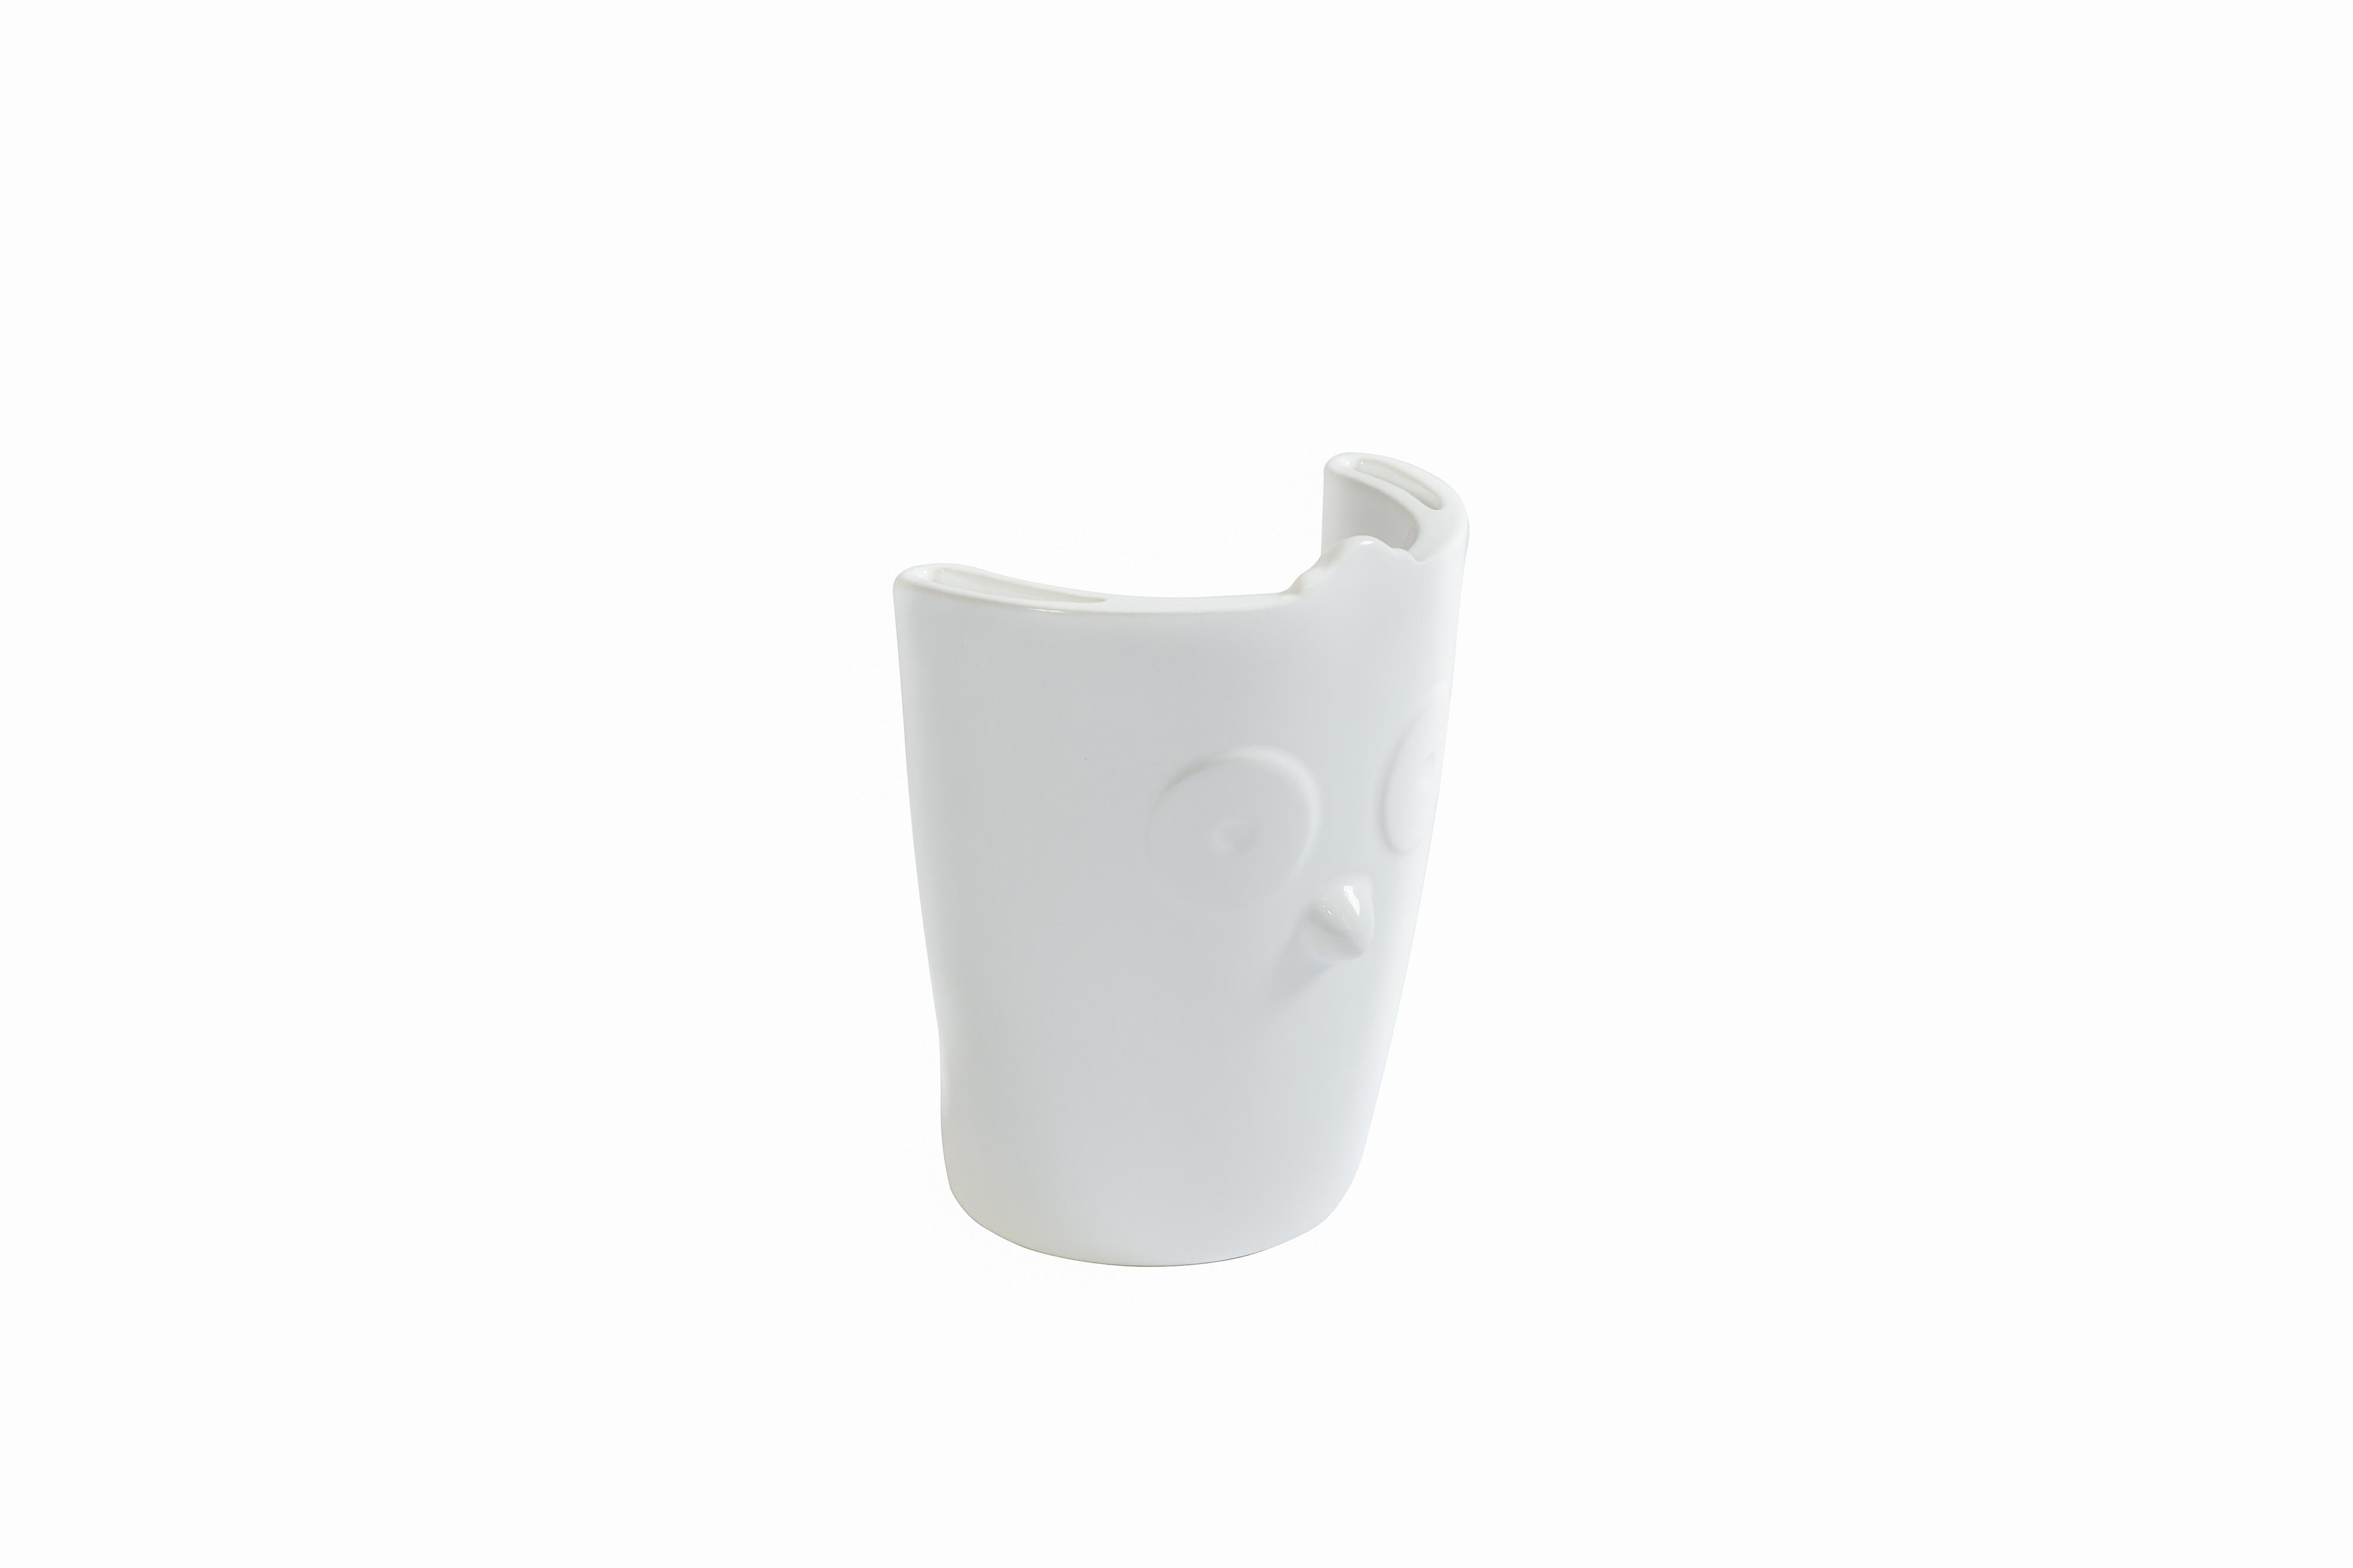 Ceramic Contemporary vase in white ceramic from the SoShiro Ainu collection For Sale